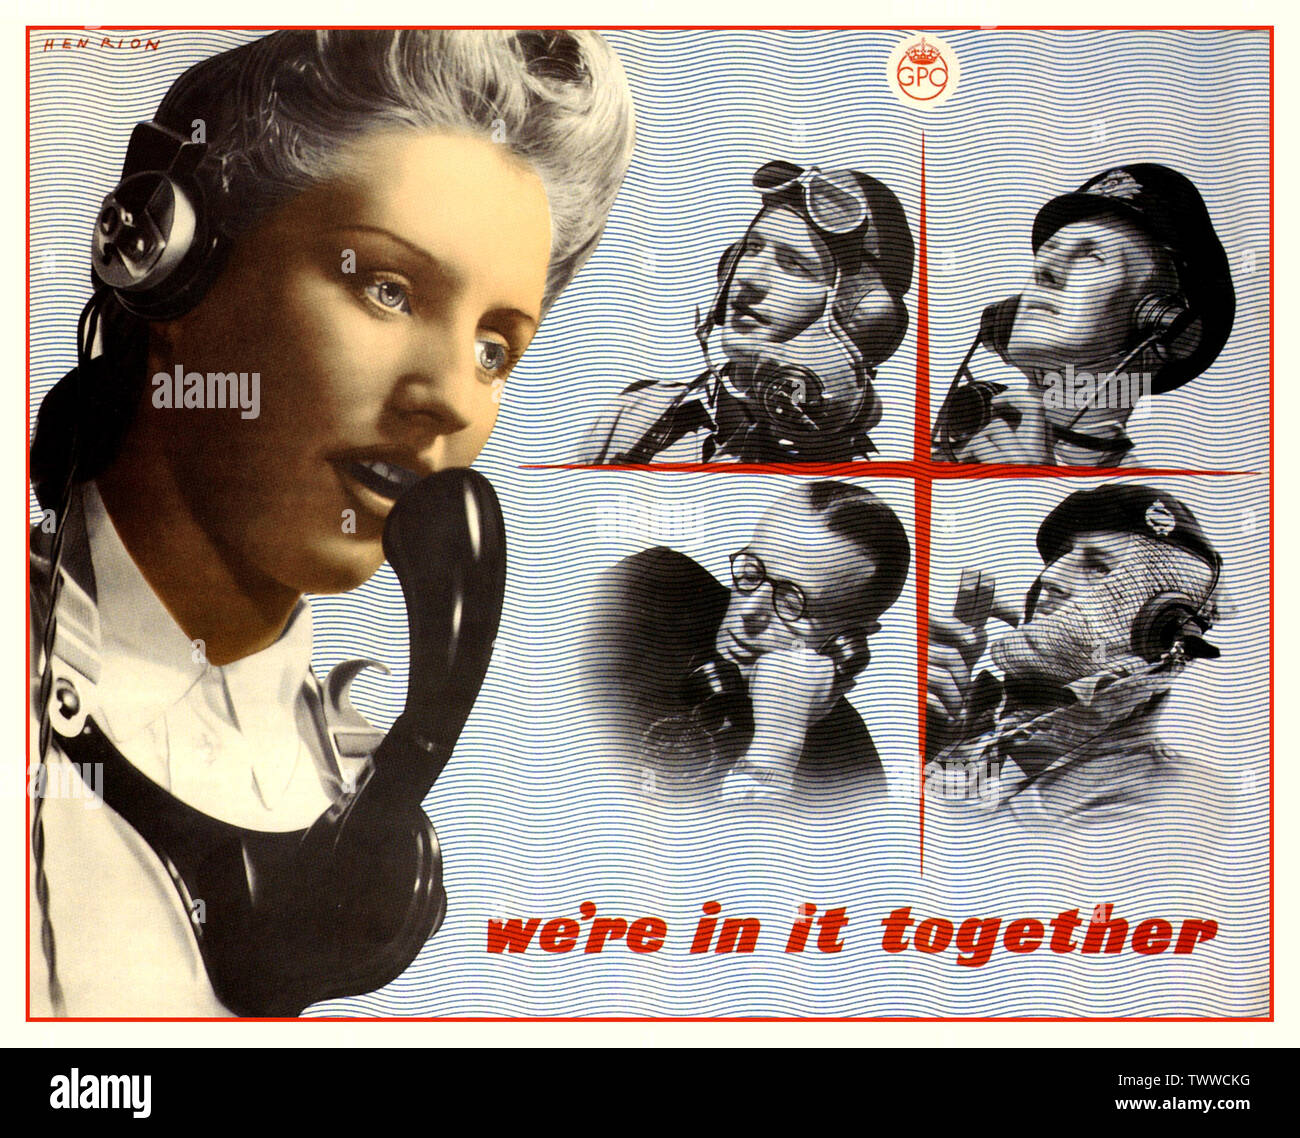 Vintage WW2 British Propaganda Poster ”We're in it together' illustrating various World War II wartime communications via the GPO network Poster by F.H.K Henrion, 1943 (U.K.) Stock Photo